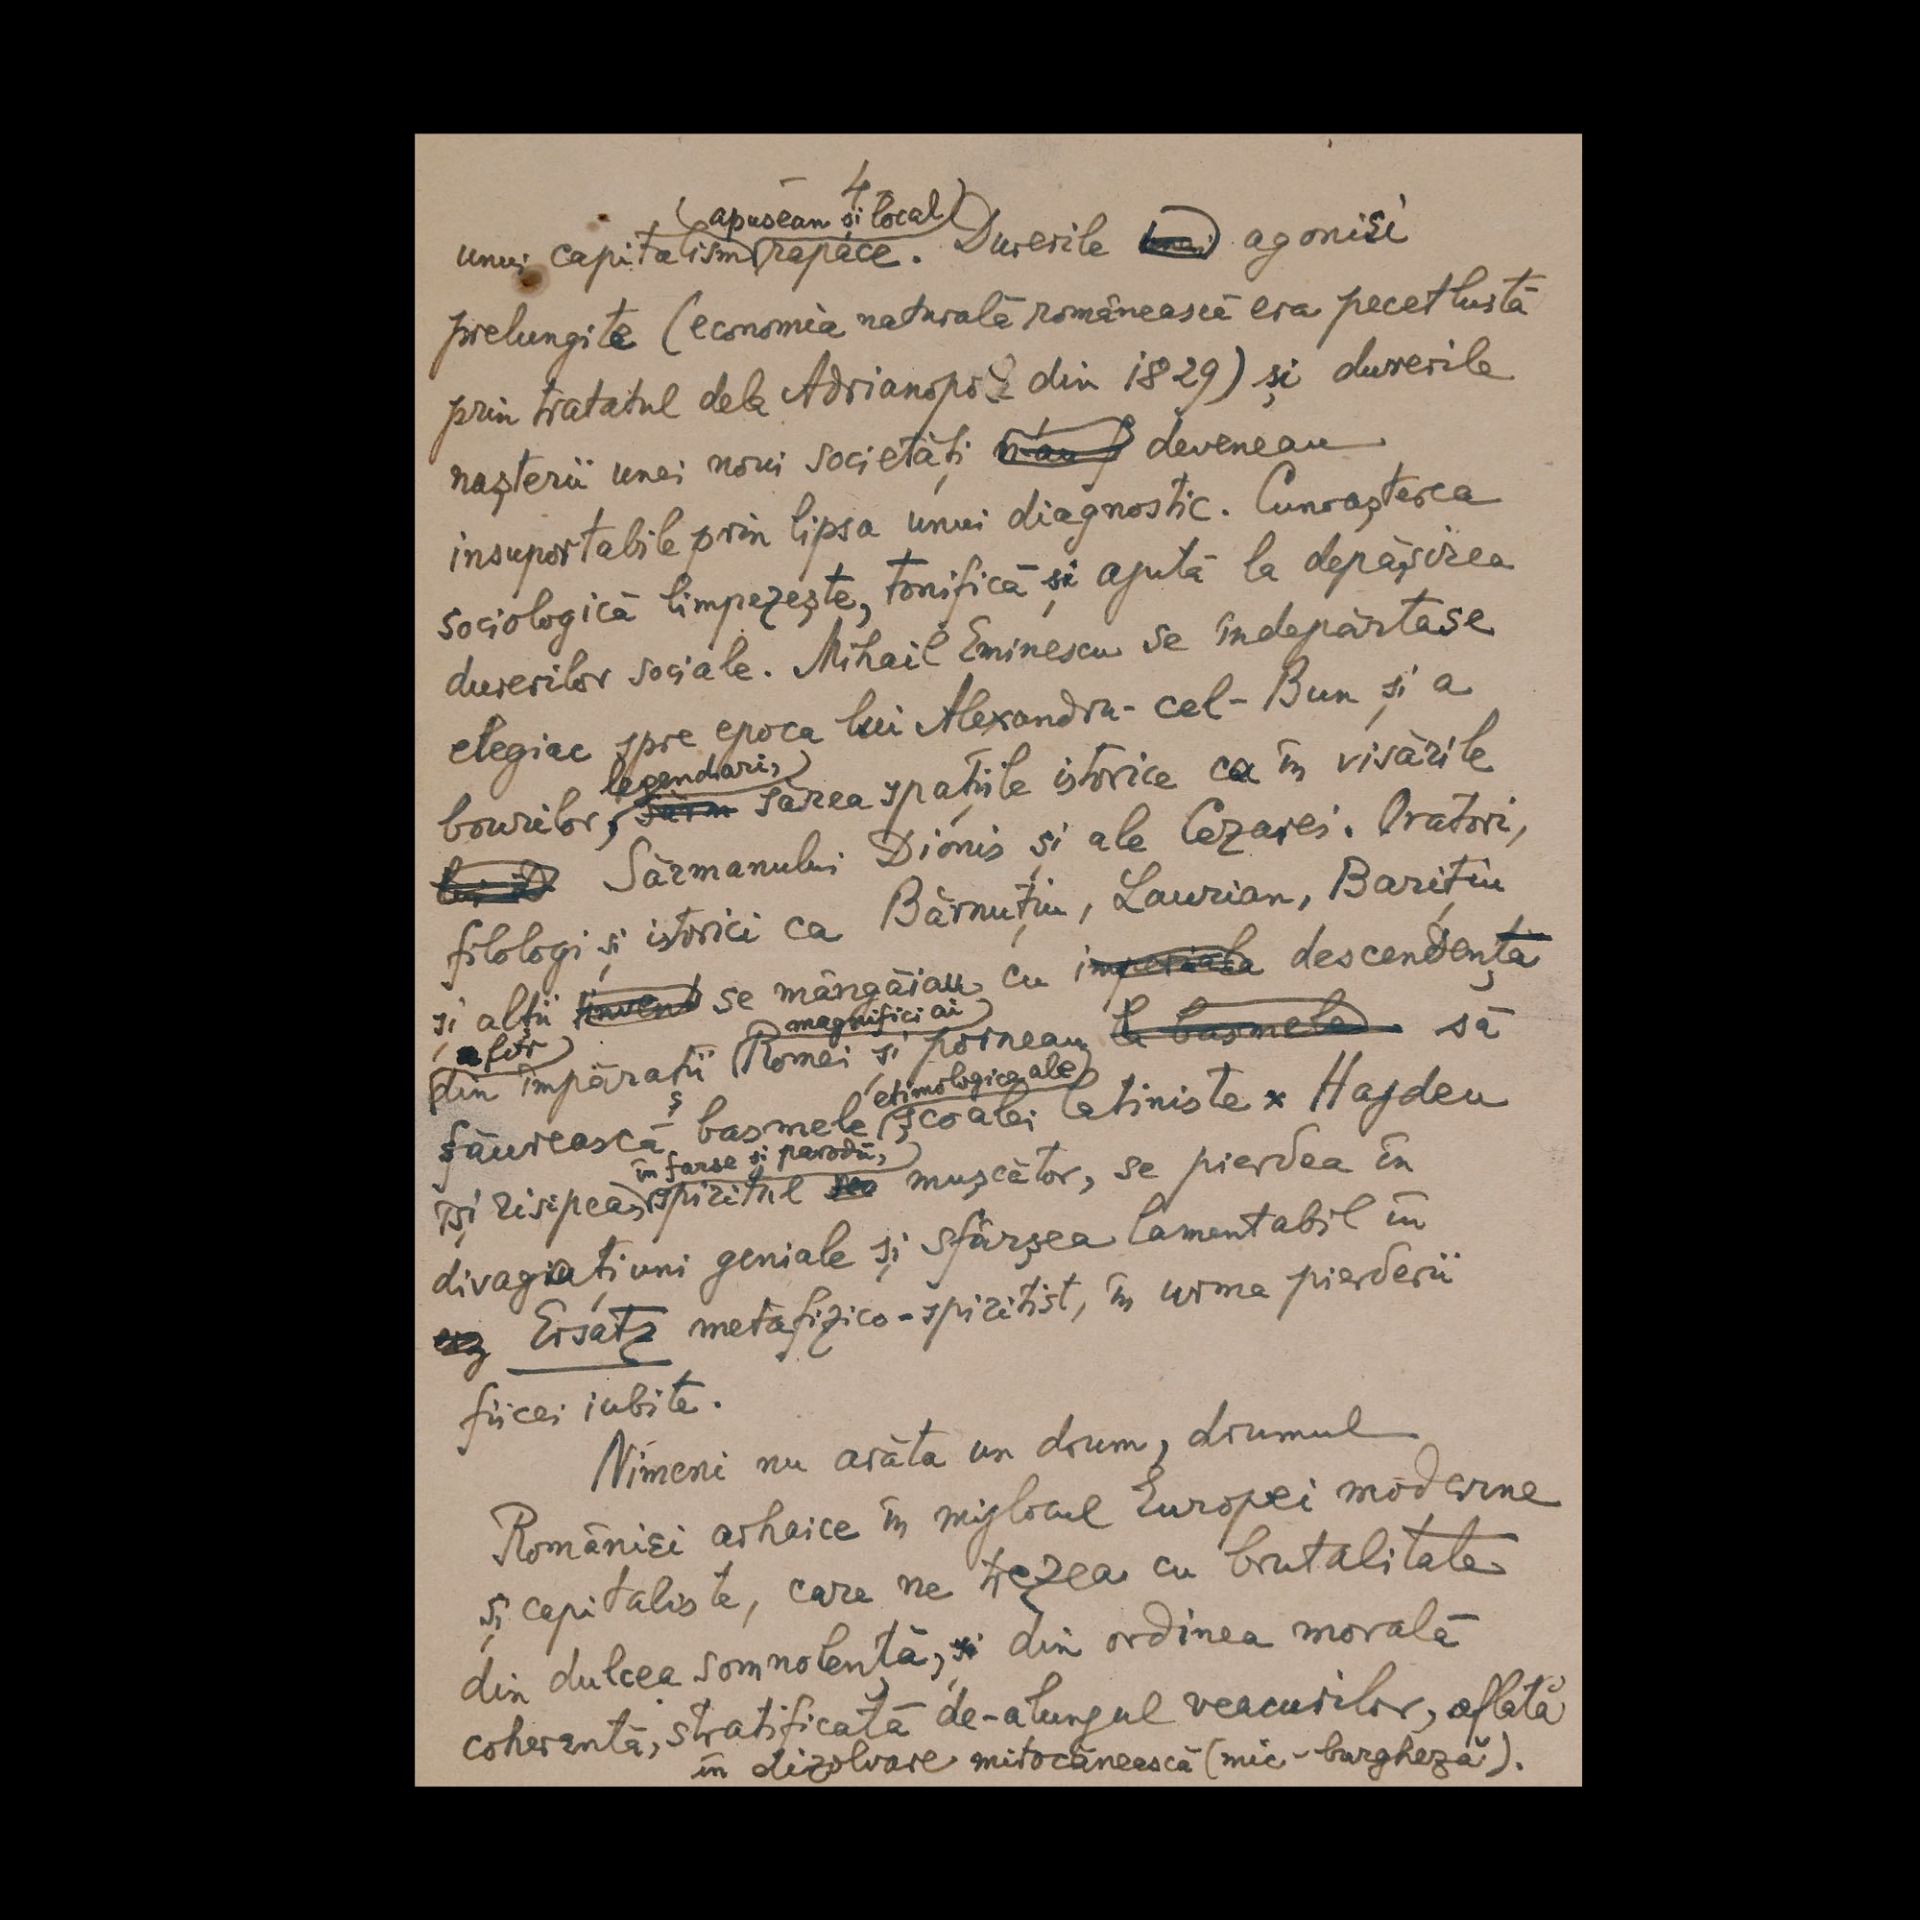 The manuscript of the article "Constatin Dobrogeanu Gherea", by Petre Pandrea, published in Orizont - Image 3 of 6